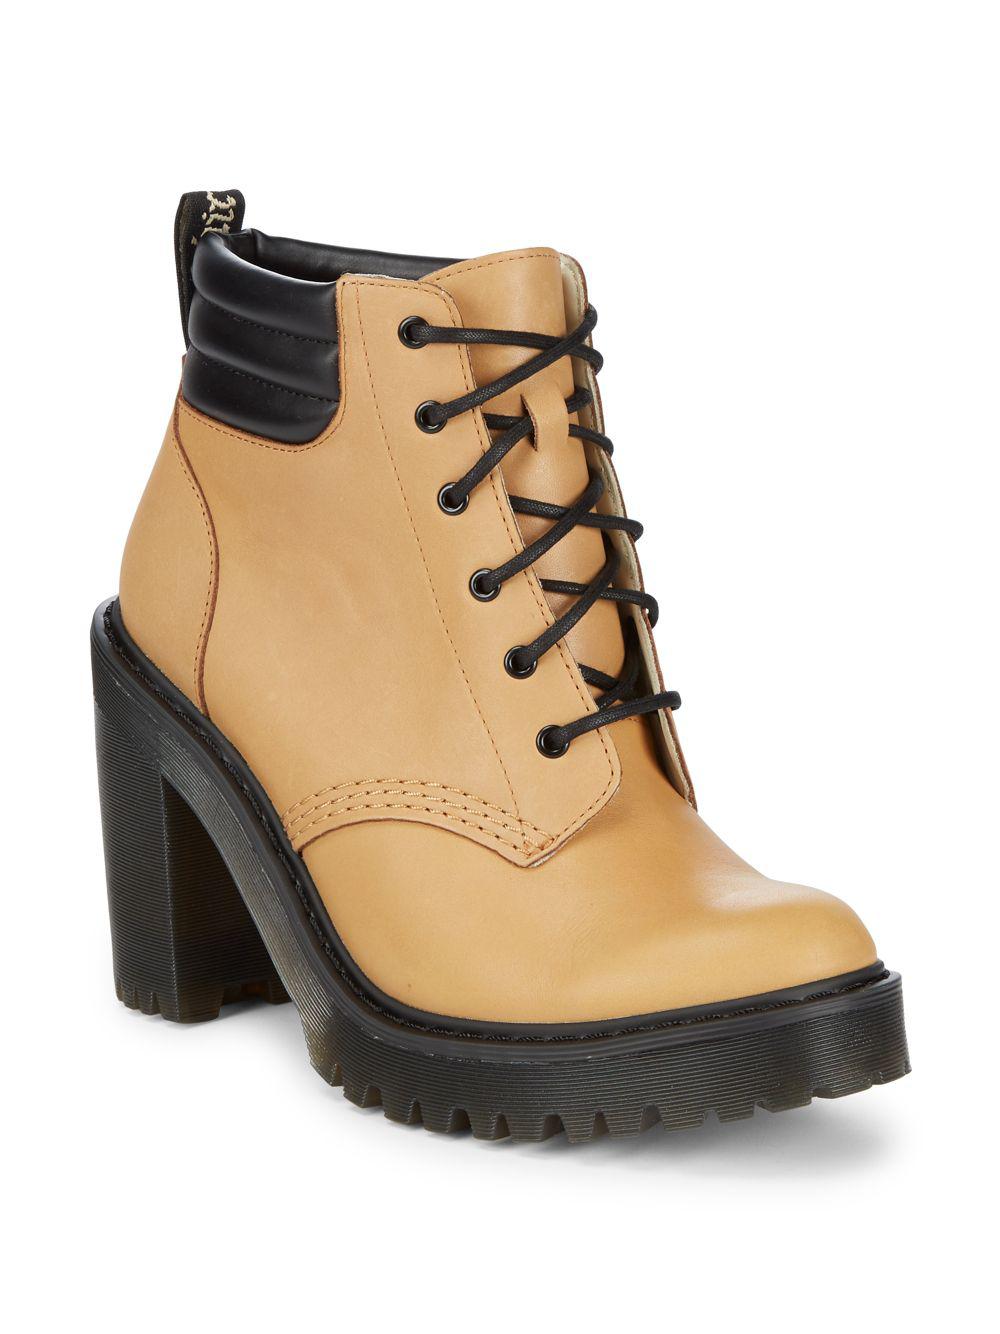 Dr. Martens Persephone Leather Boots in Brown | Lyst